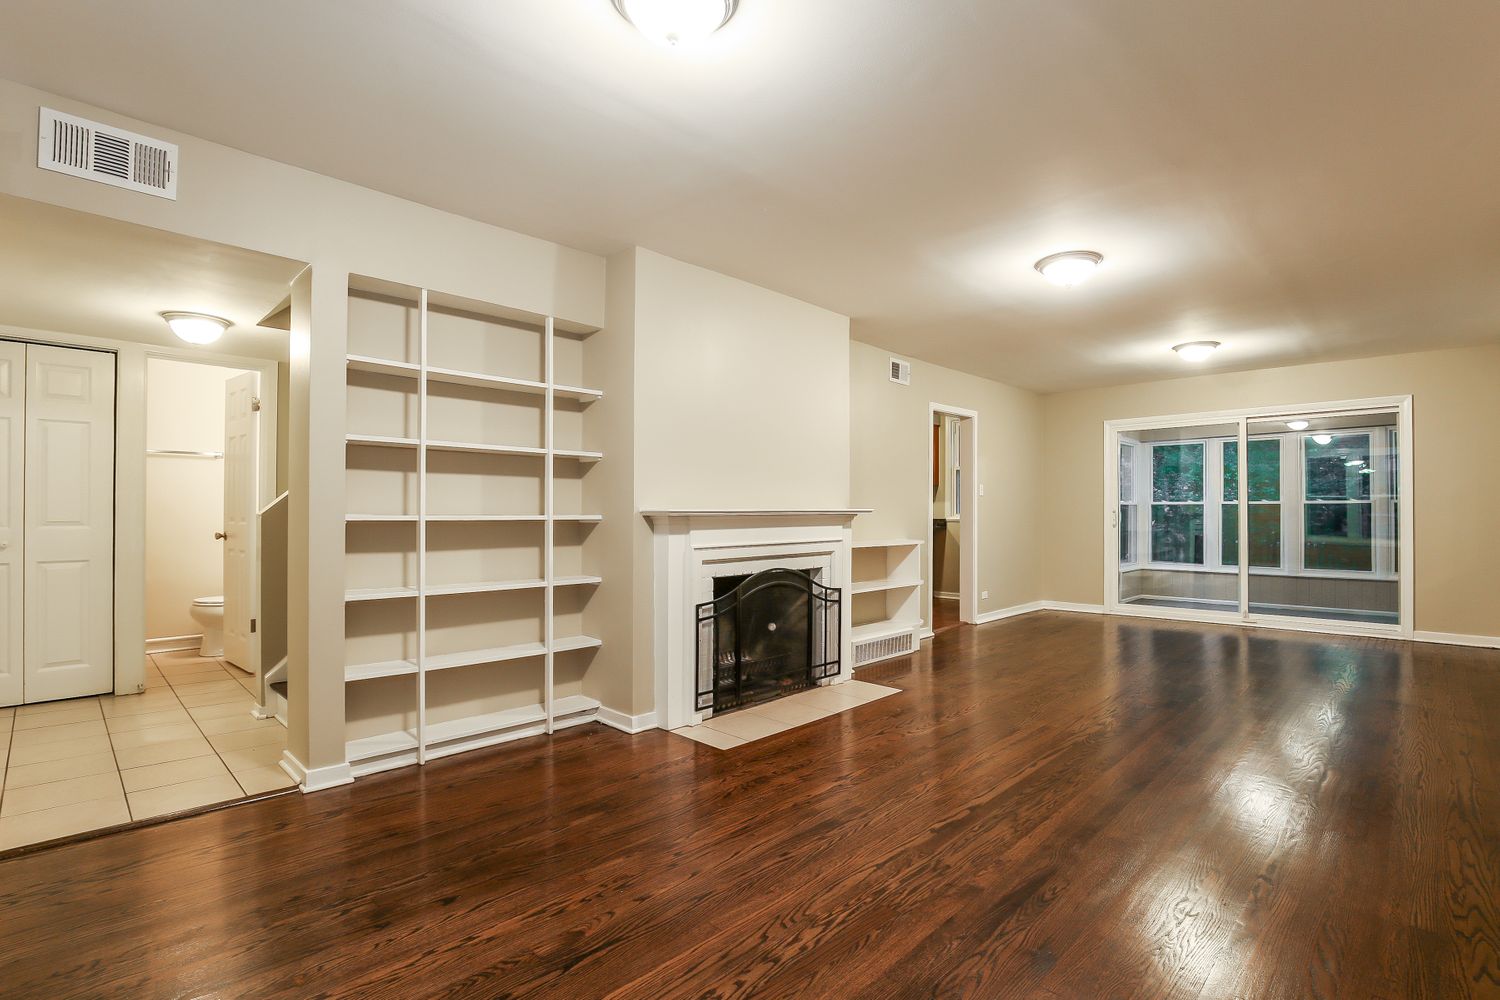 Spacious living space with hardwood flooring at Invitation Homes Chicago.